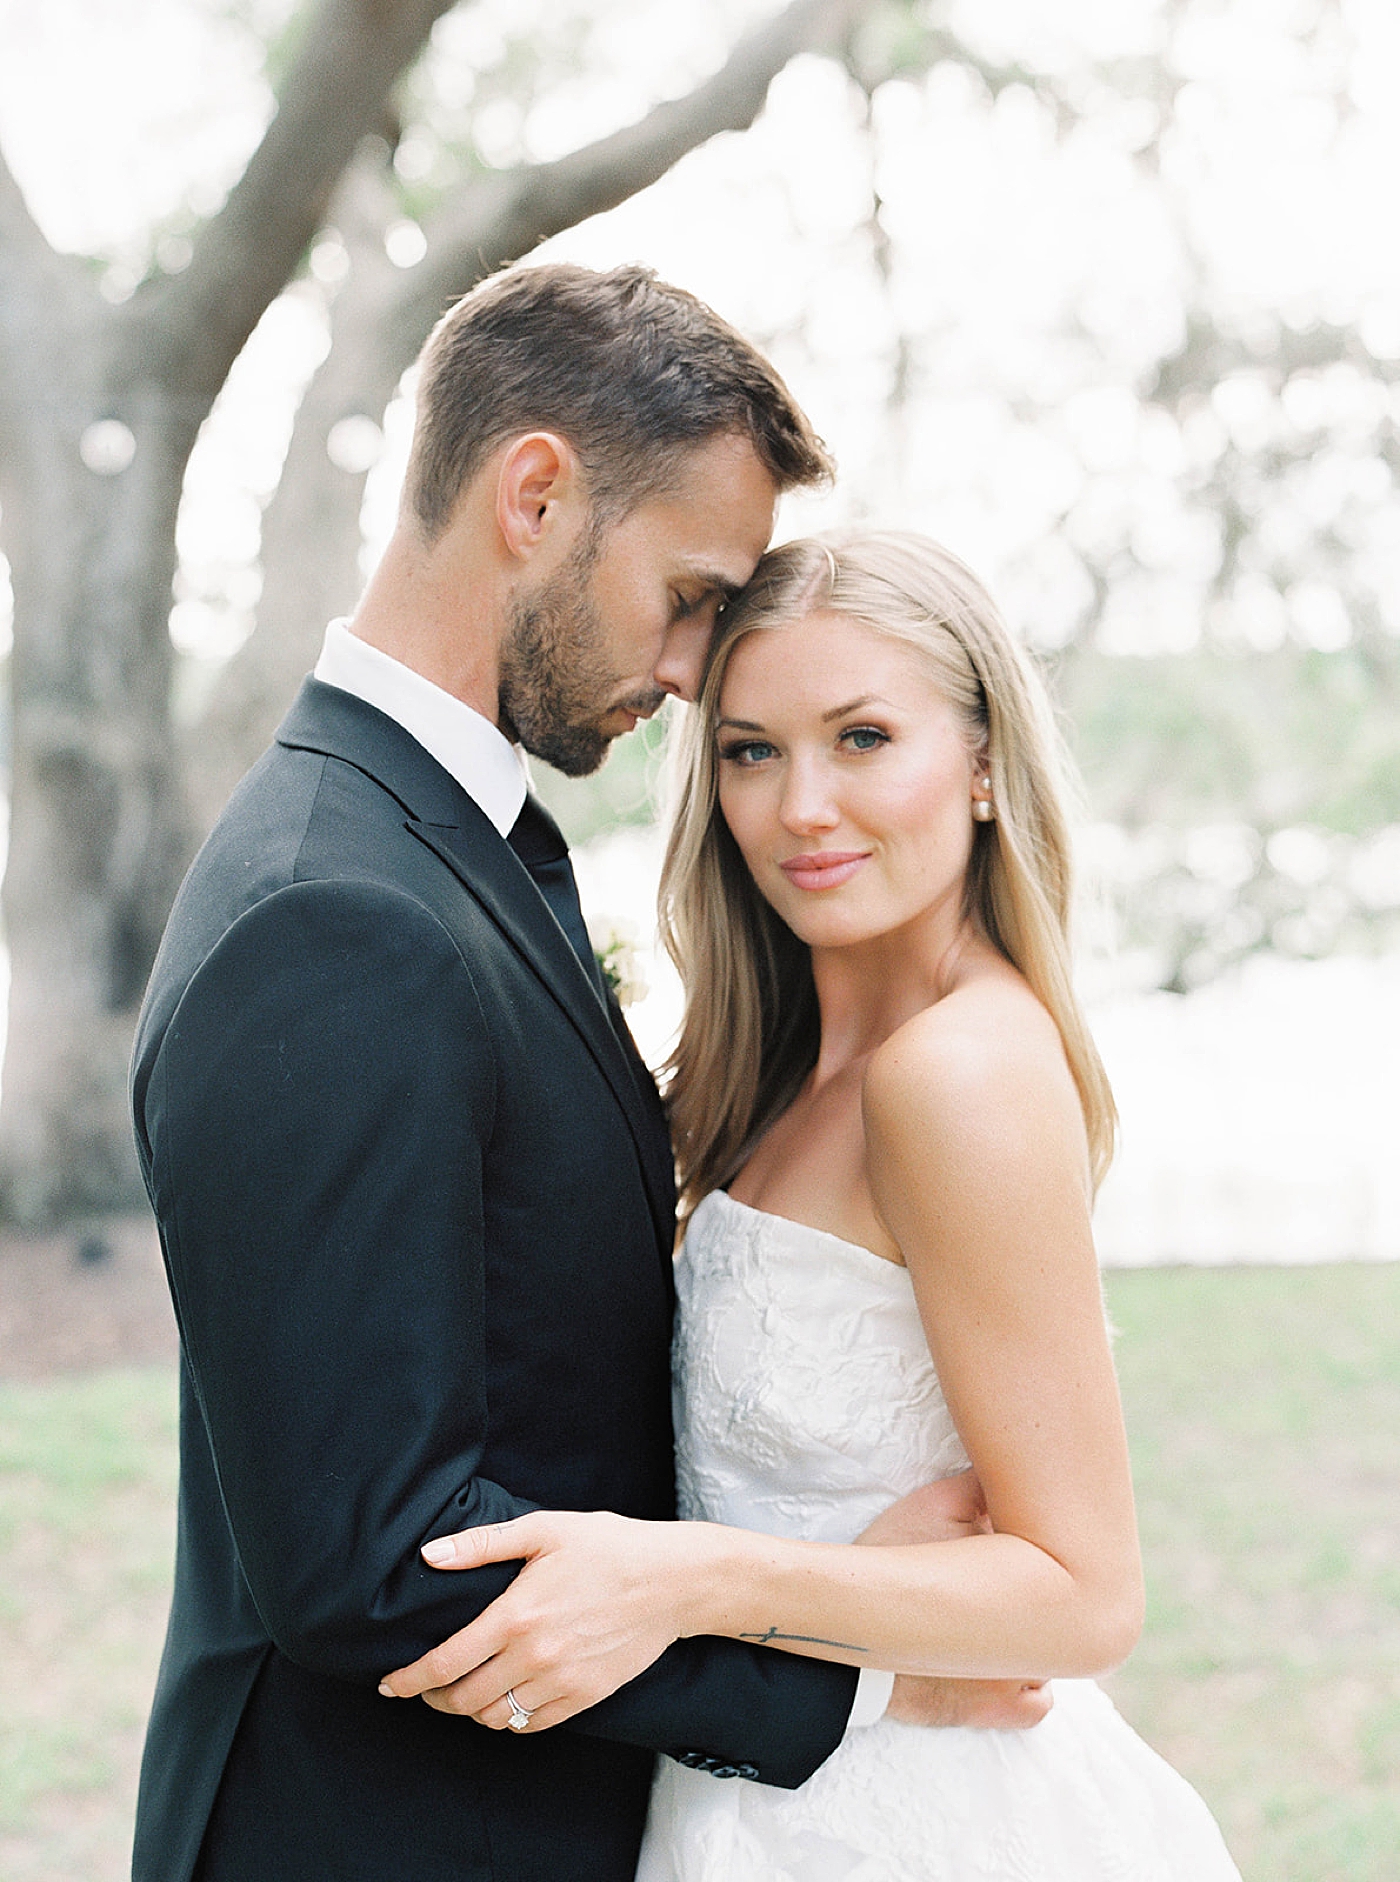 Bride and groom embracing during portraits | Carters Event Co